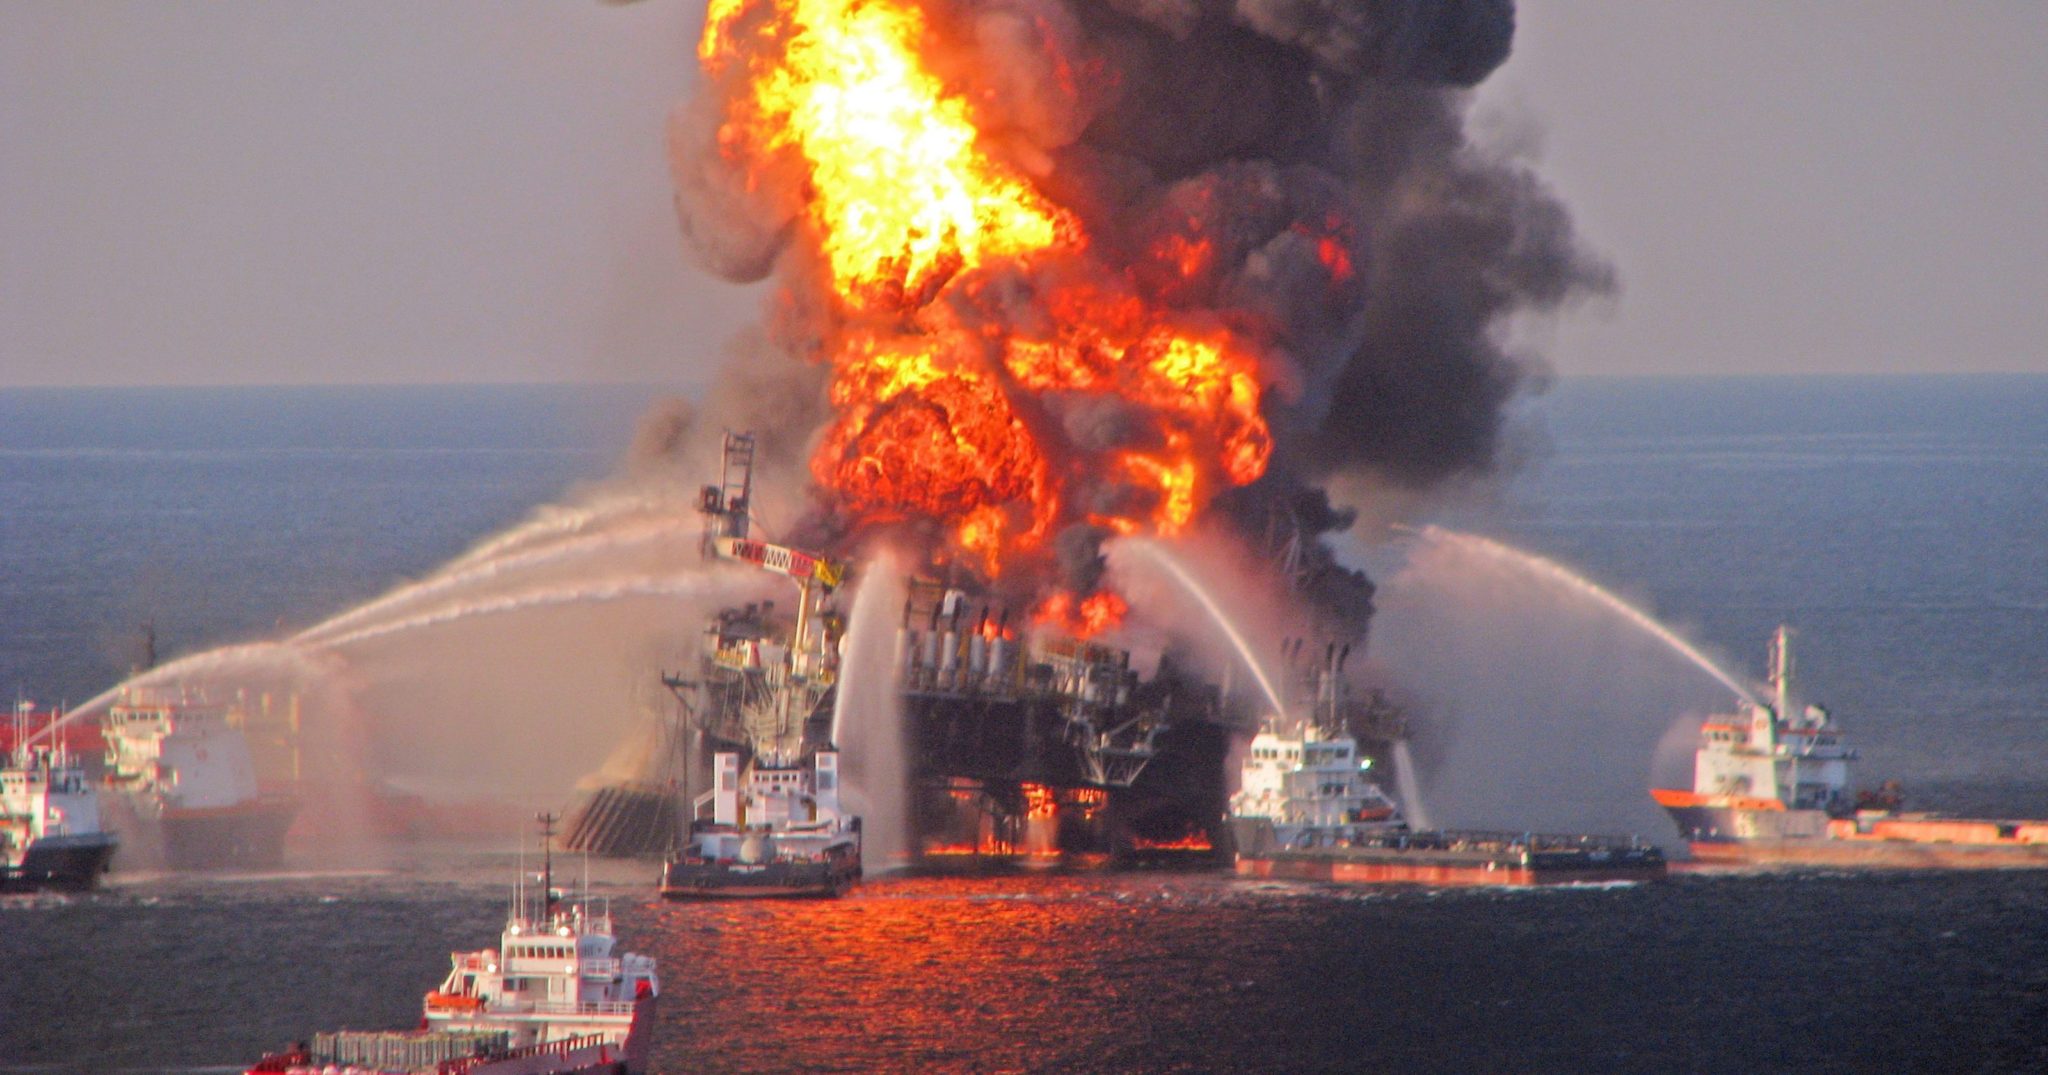 Learn From The Past Deepwater Horizon Oil Spill Safety4sea